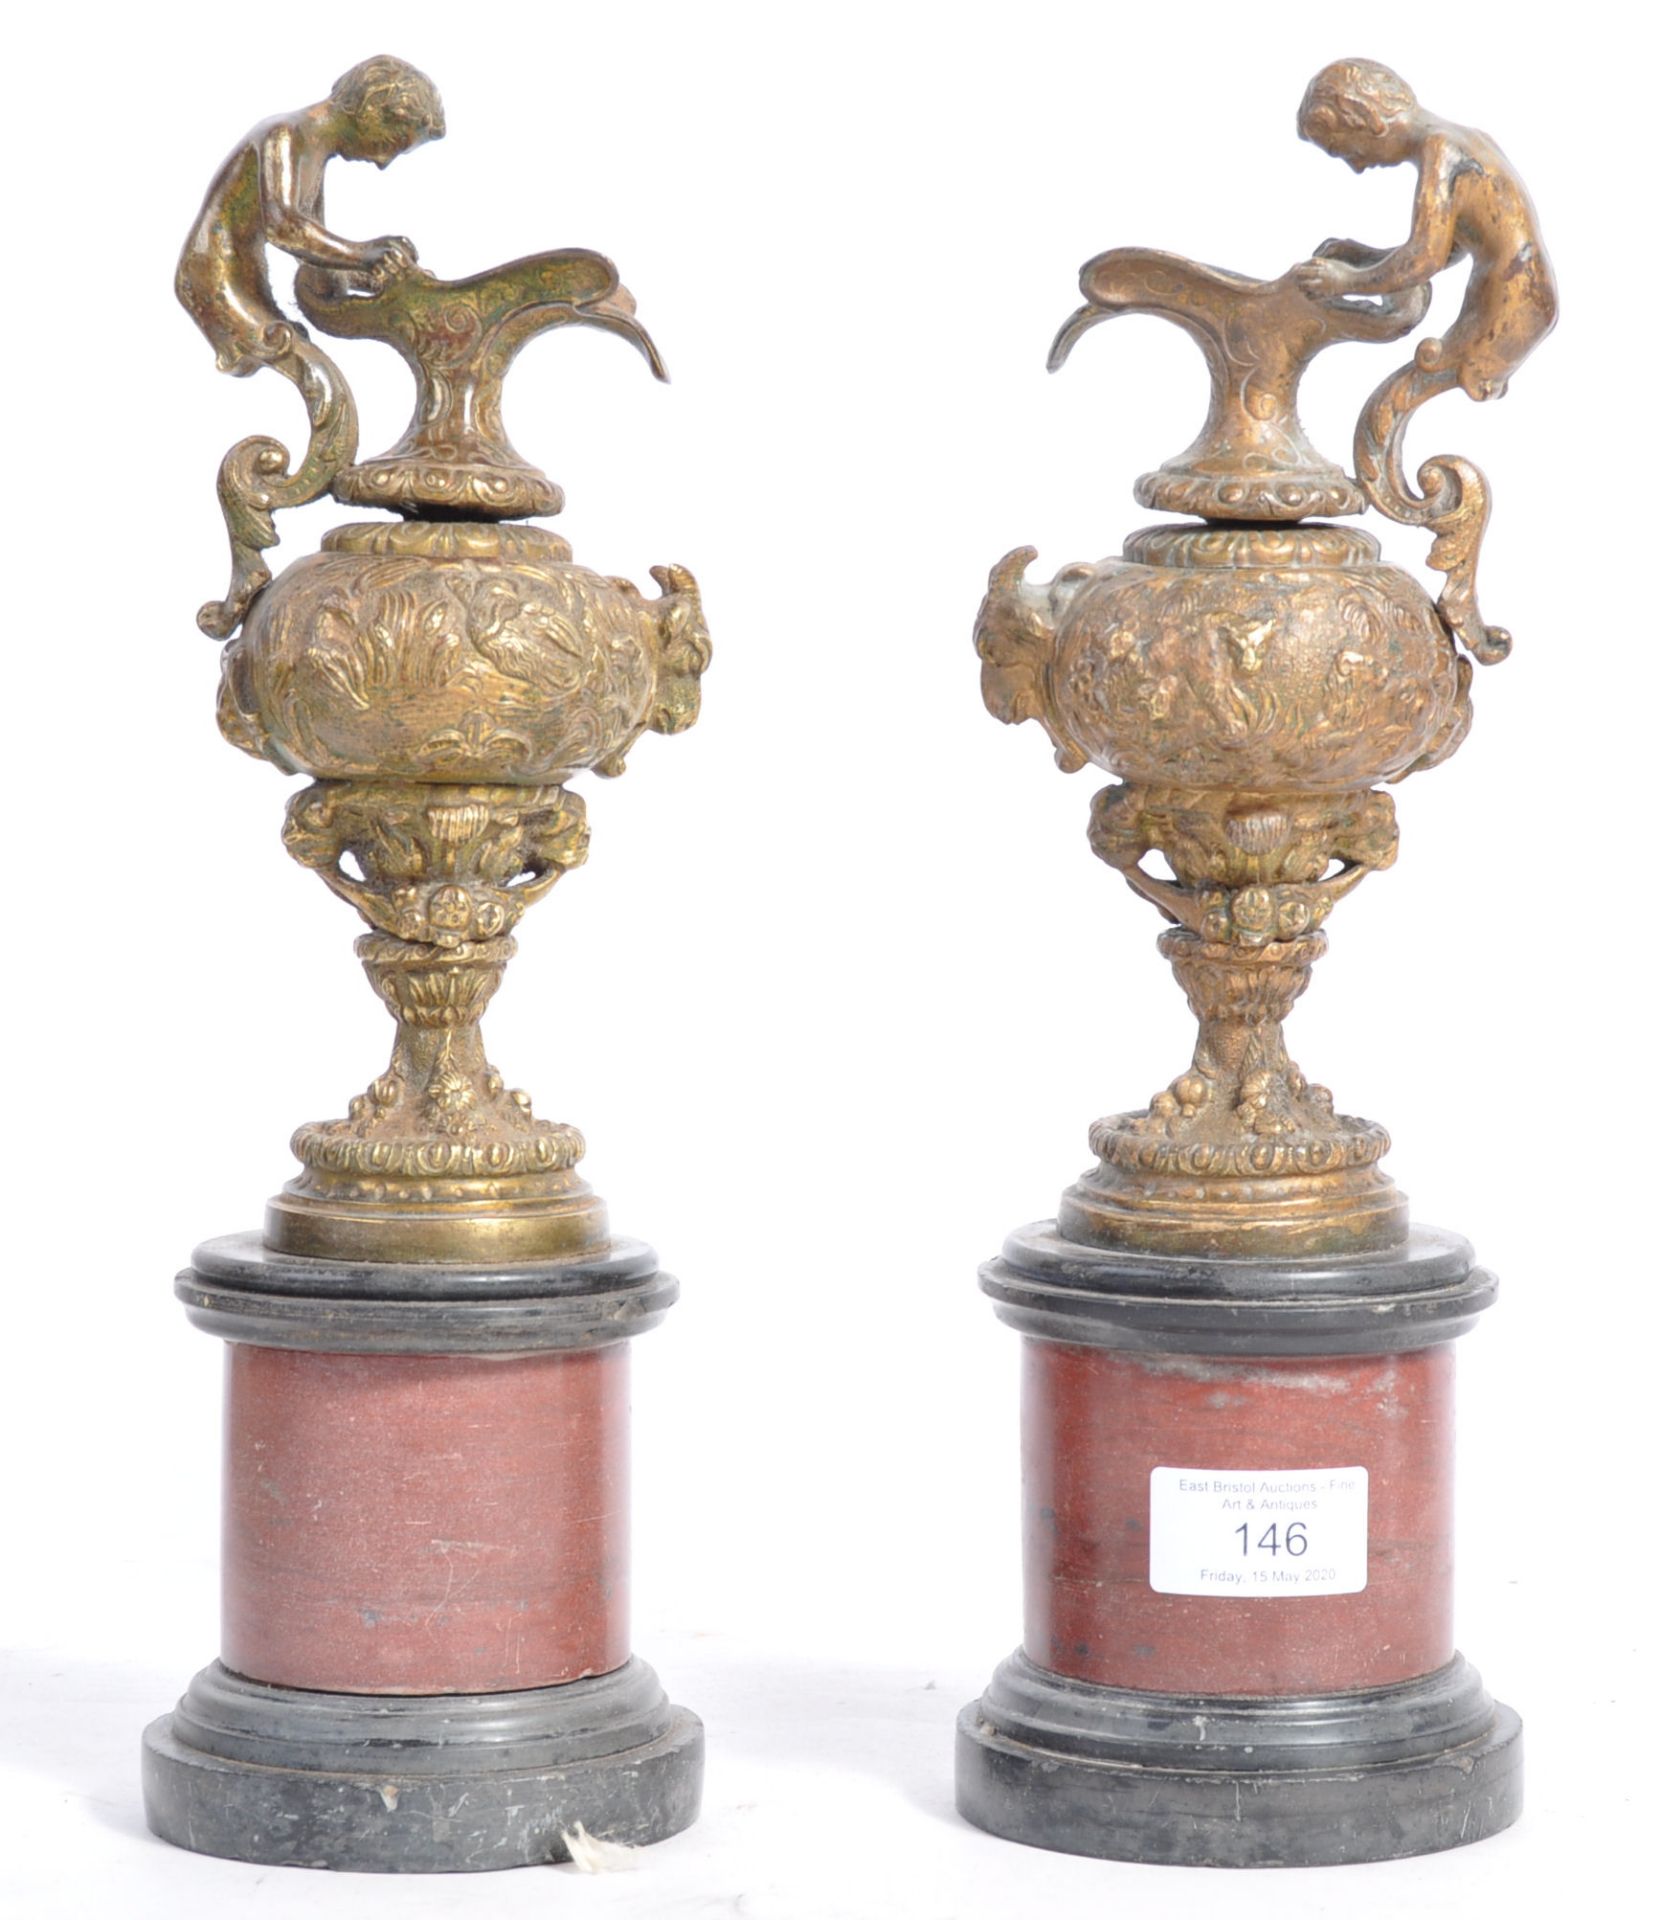 PAIR OF 19TH CENTURY BRONZE AND MARBLE URNS